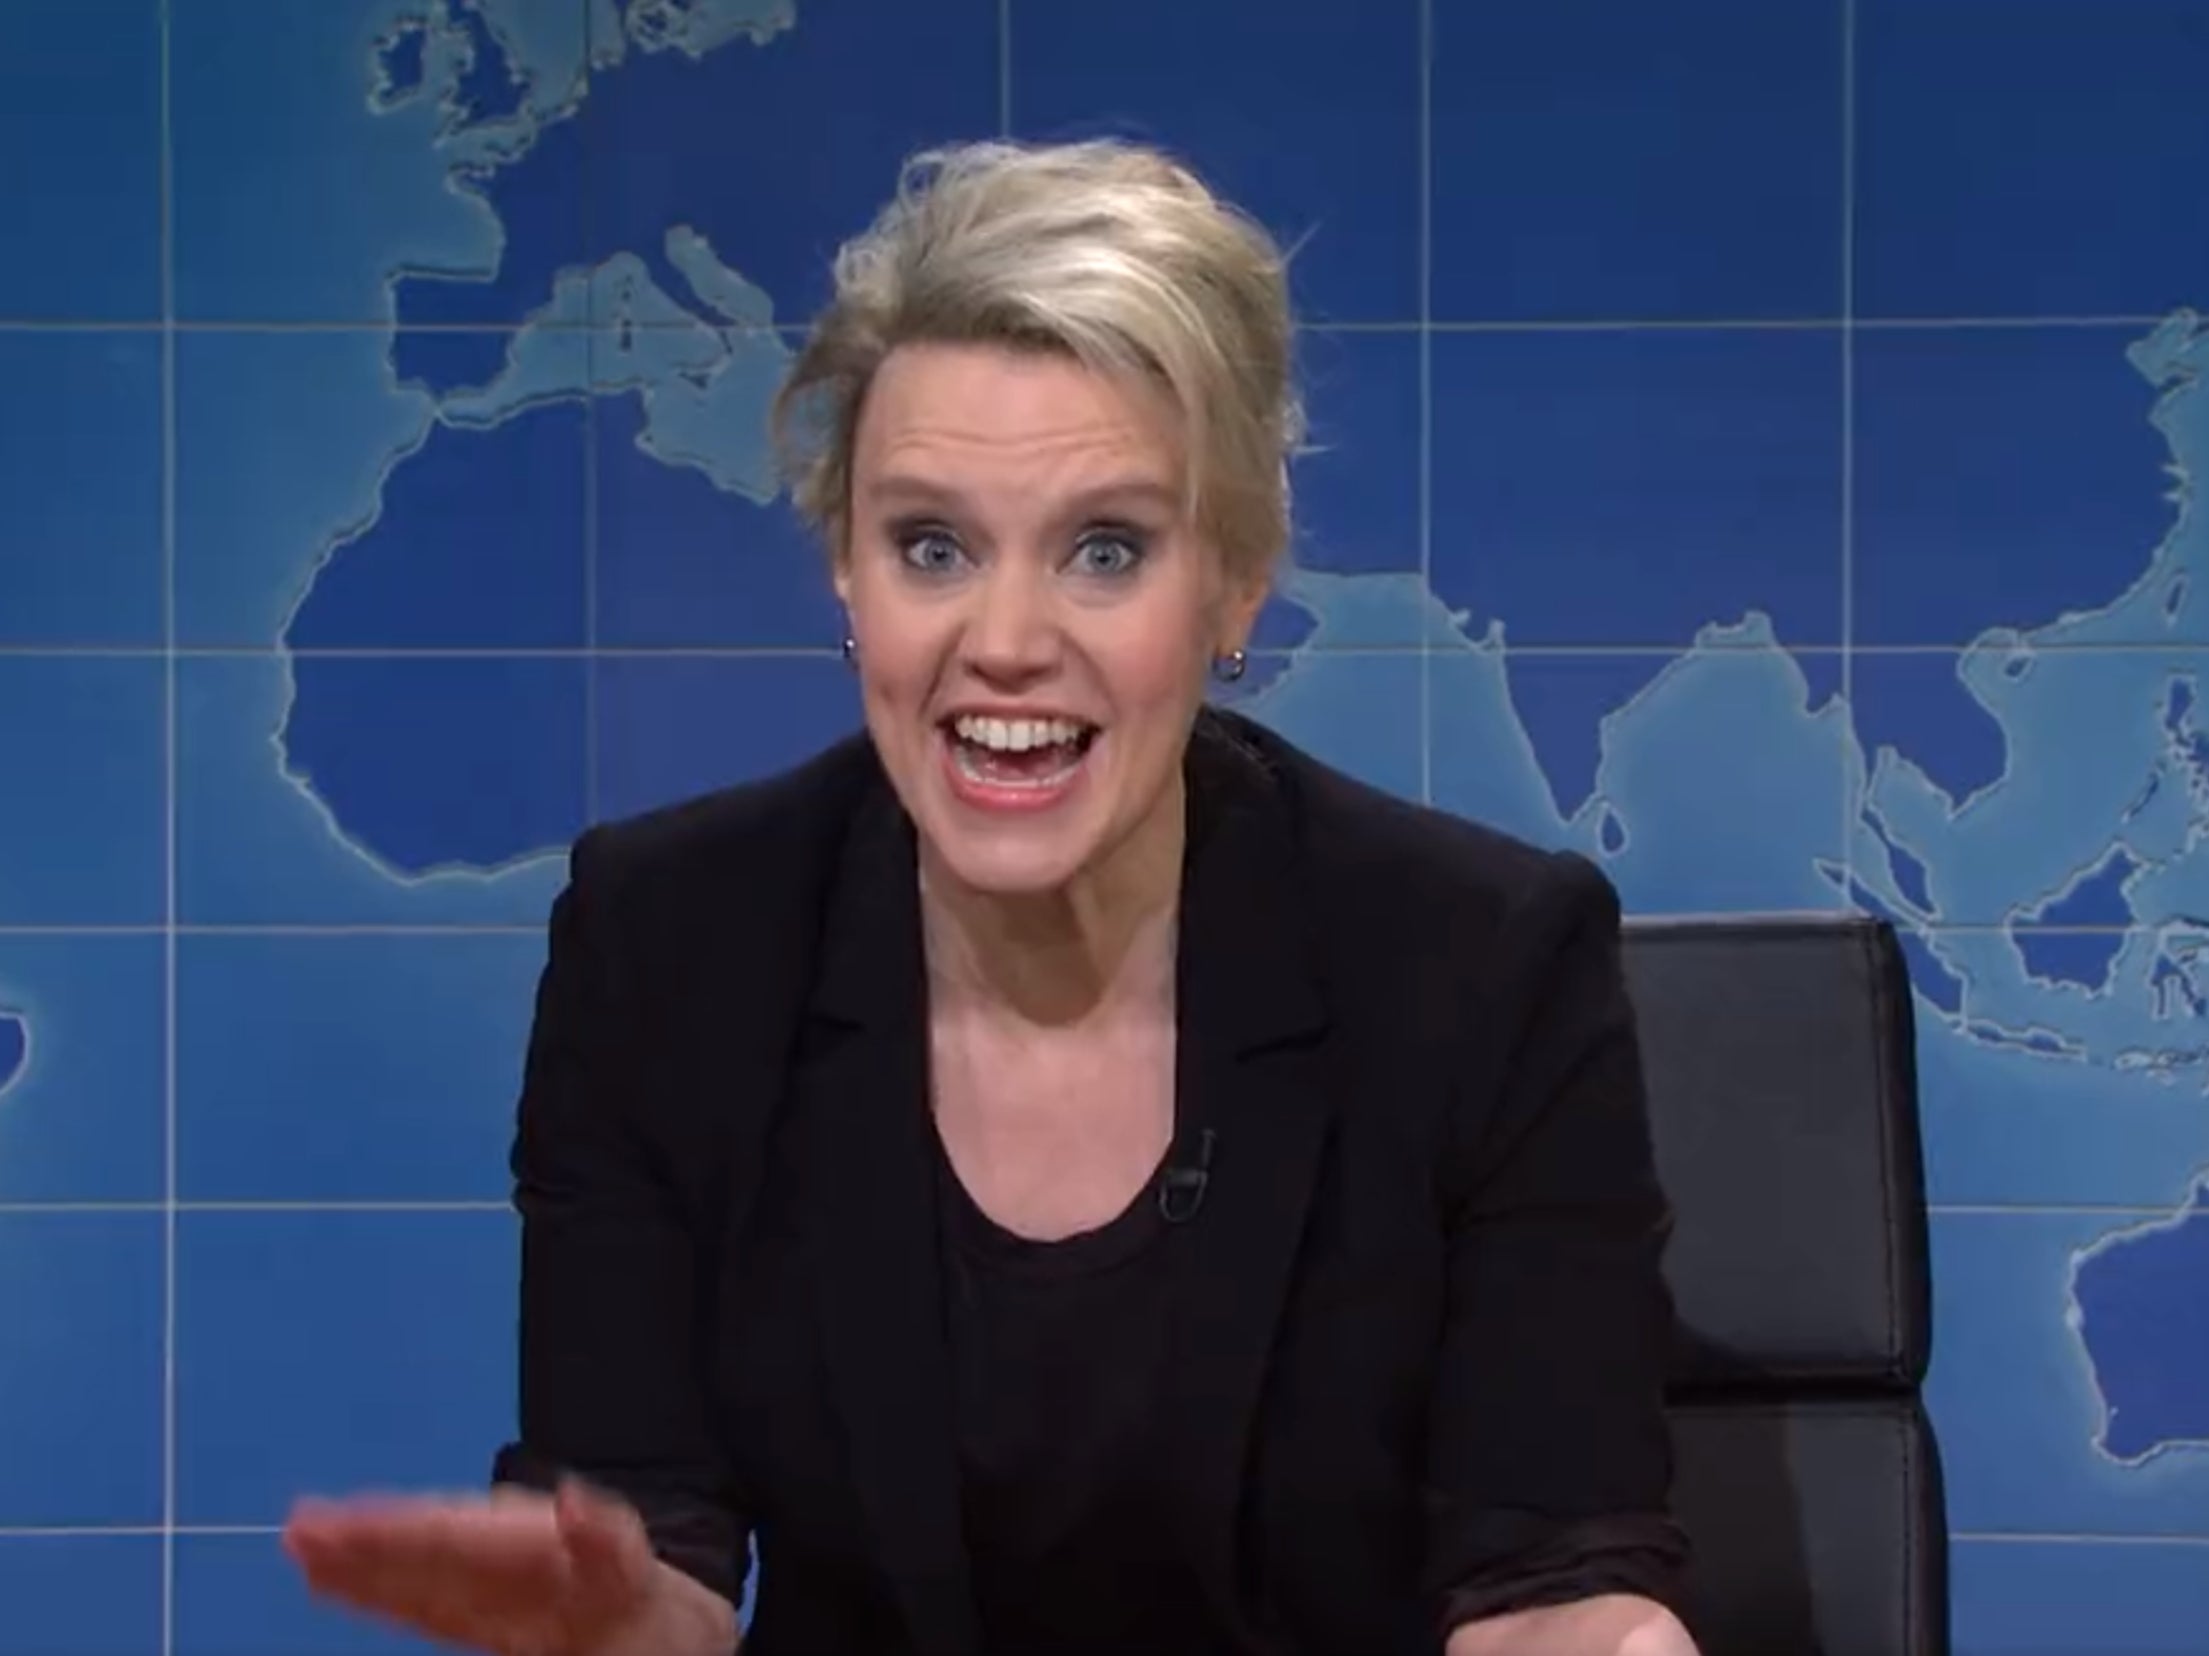 SNL’s Kate McKinnon speaks out against Florida’s ‘Don’t Say Gay’ Bill